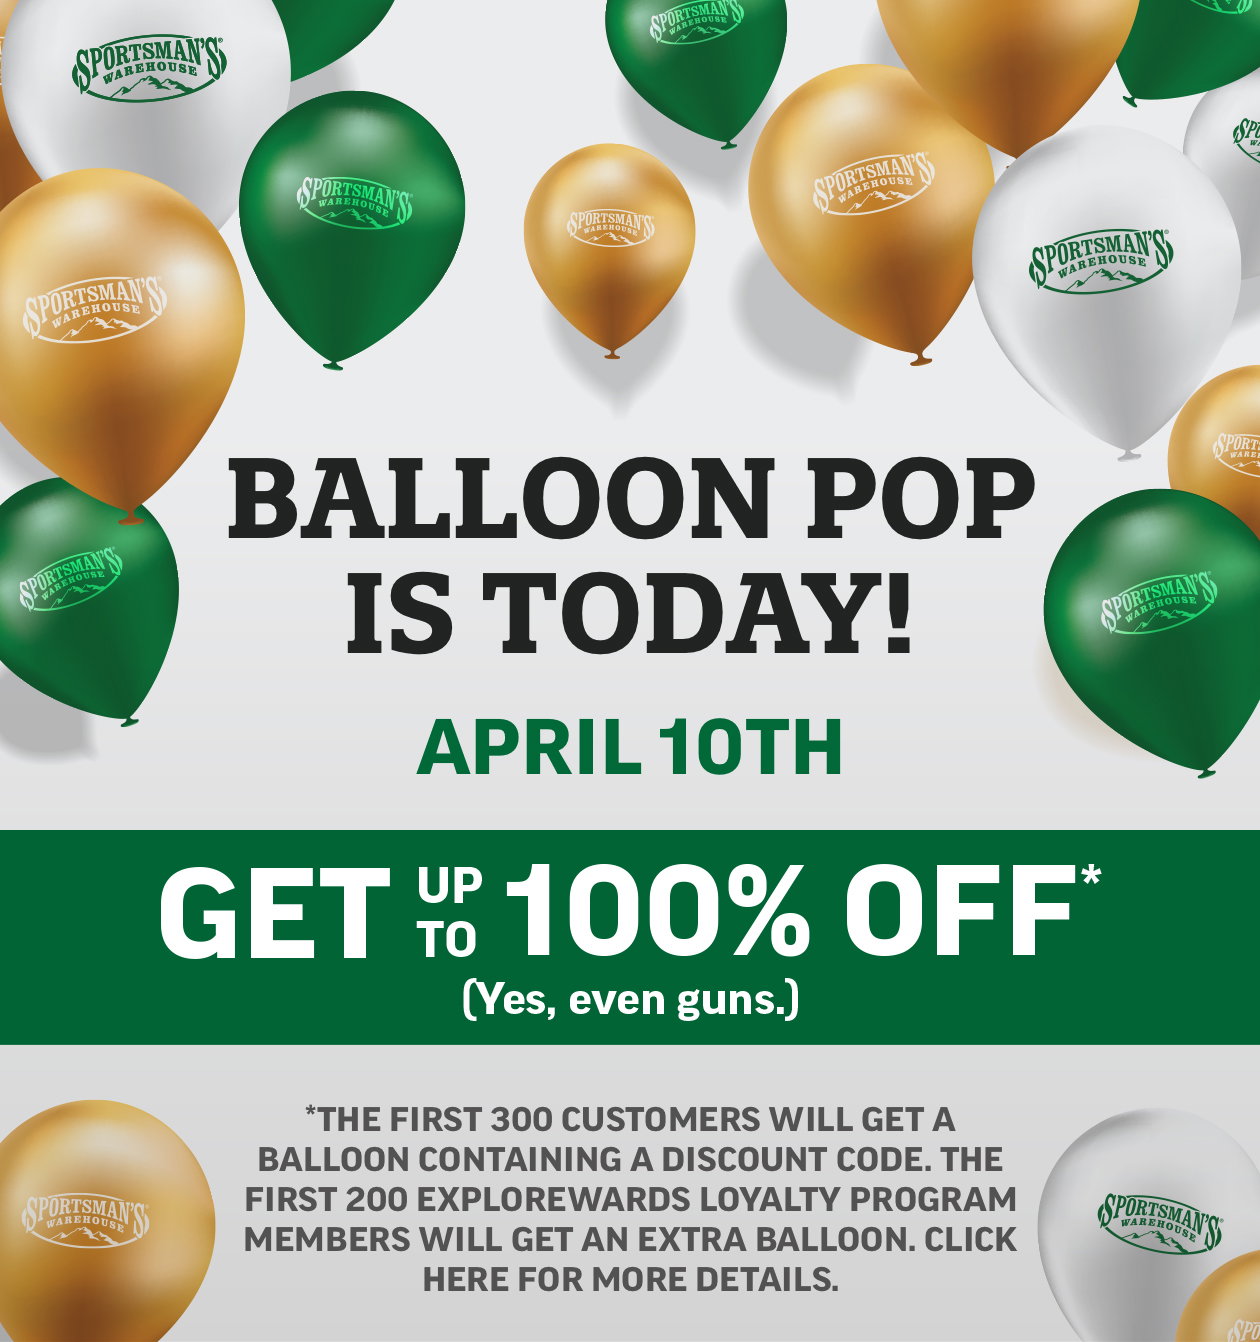 Sportsman's Warehouse The Balloon Pop celebration is today! Milled